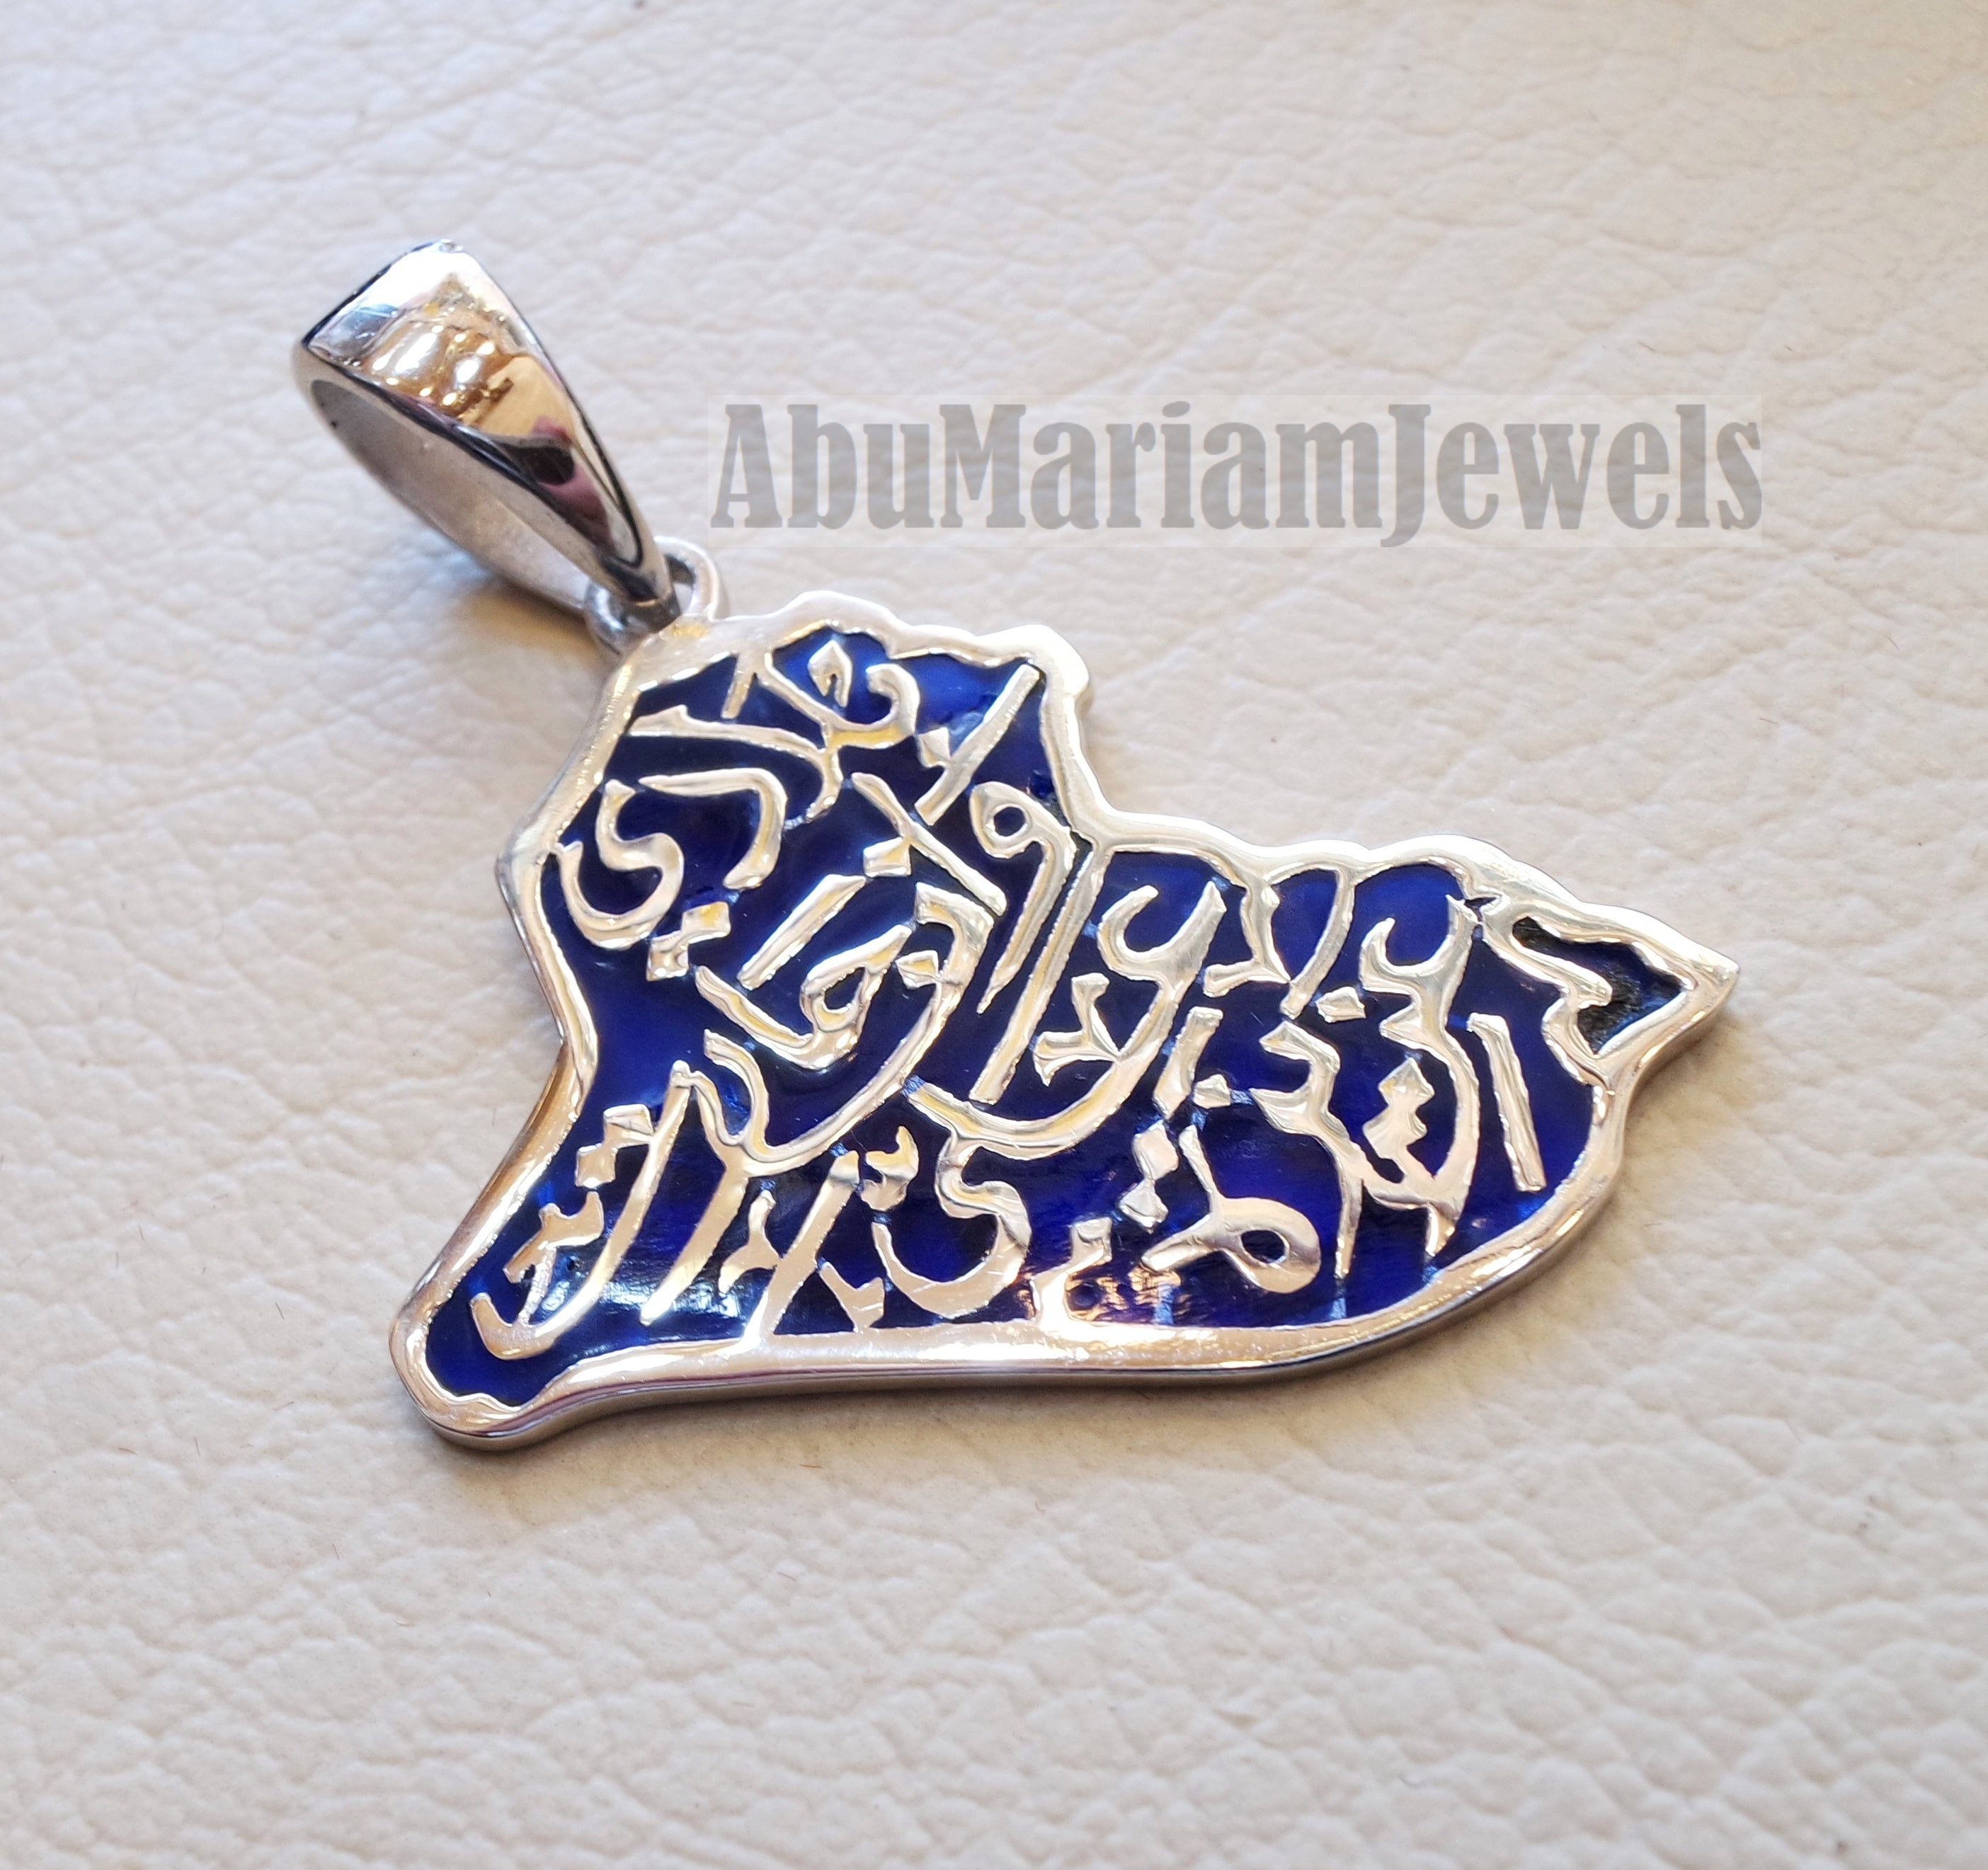 Iraq map with frame pendant with famous poem verse sterling silver 925 with dark blue enamel مينا jewelry arabic fast shipping خارطة العراق